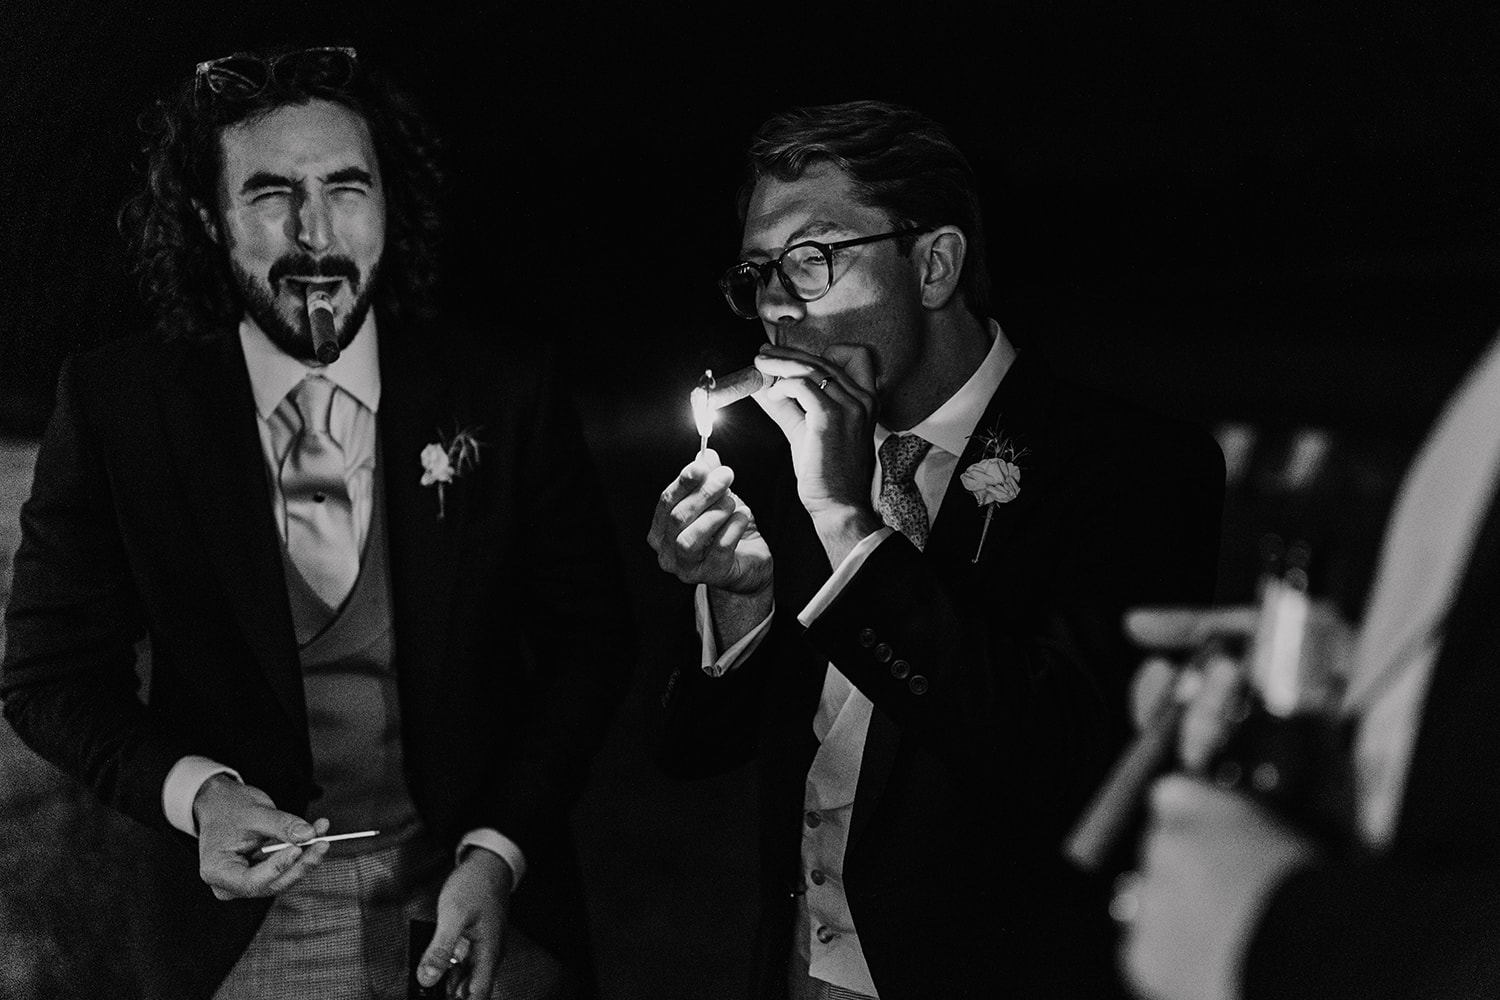 Black and white image of the Groom smoking a cigar